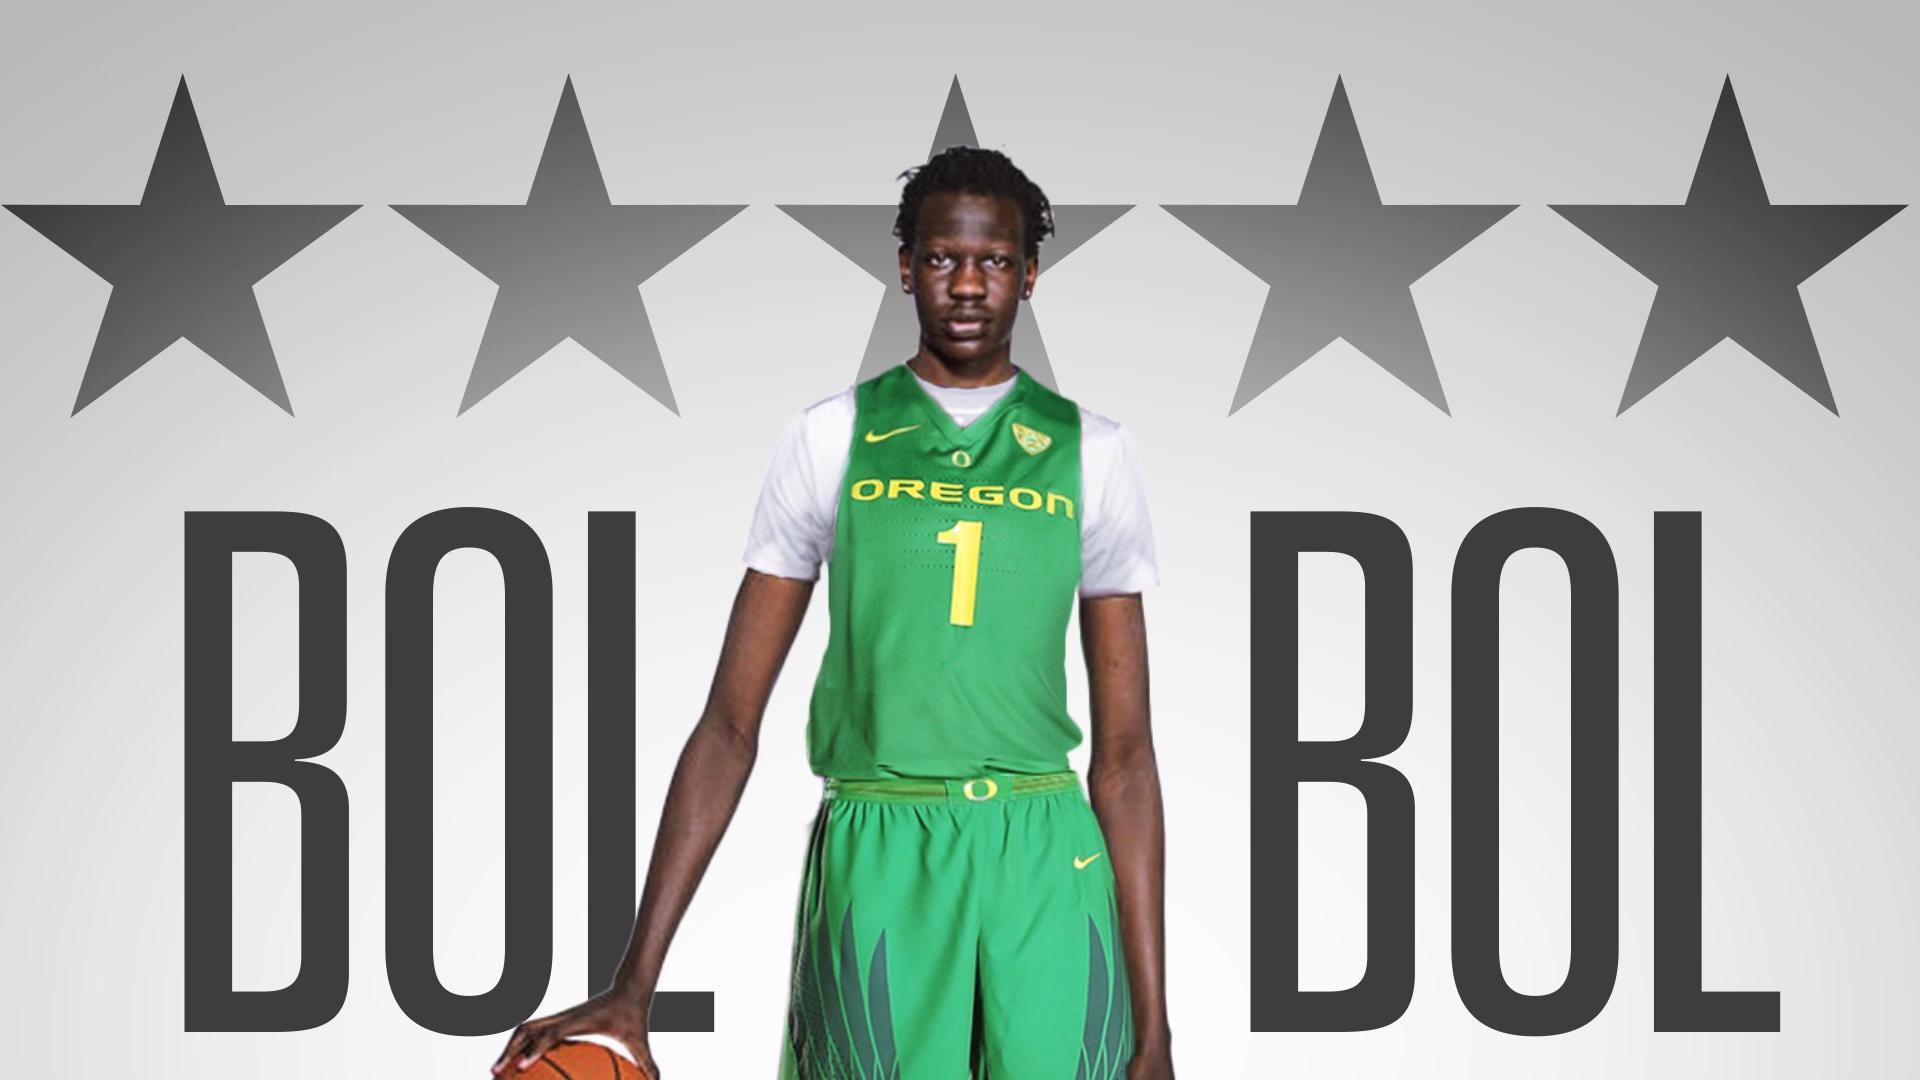 Will Bol Bol surpass his father in the NBA?